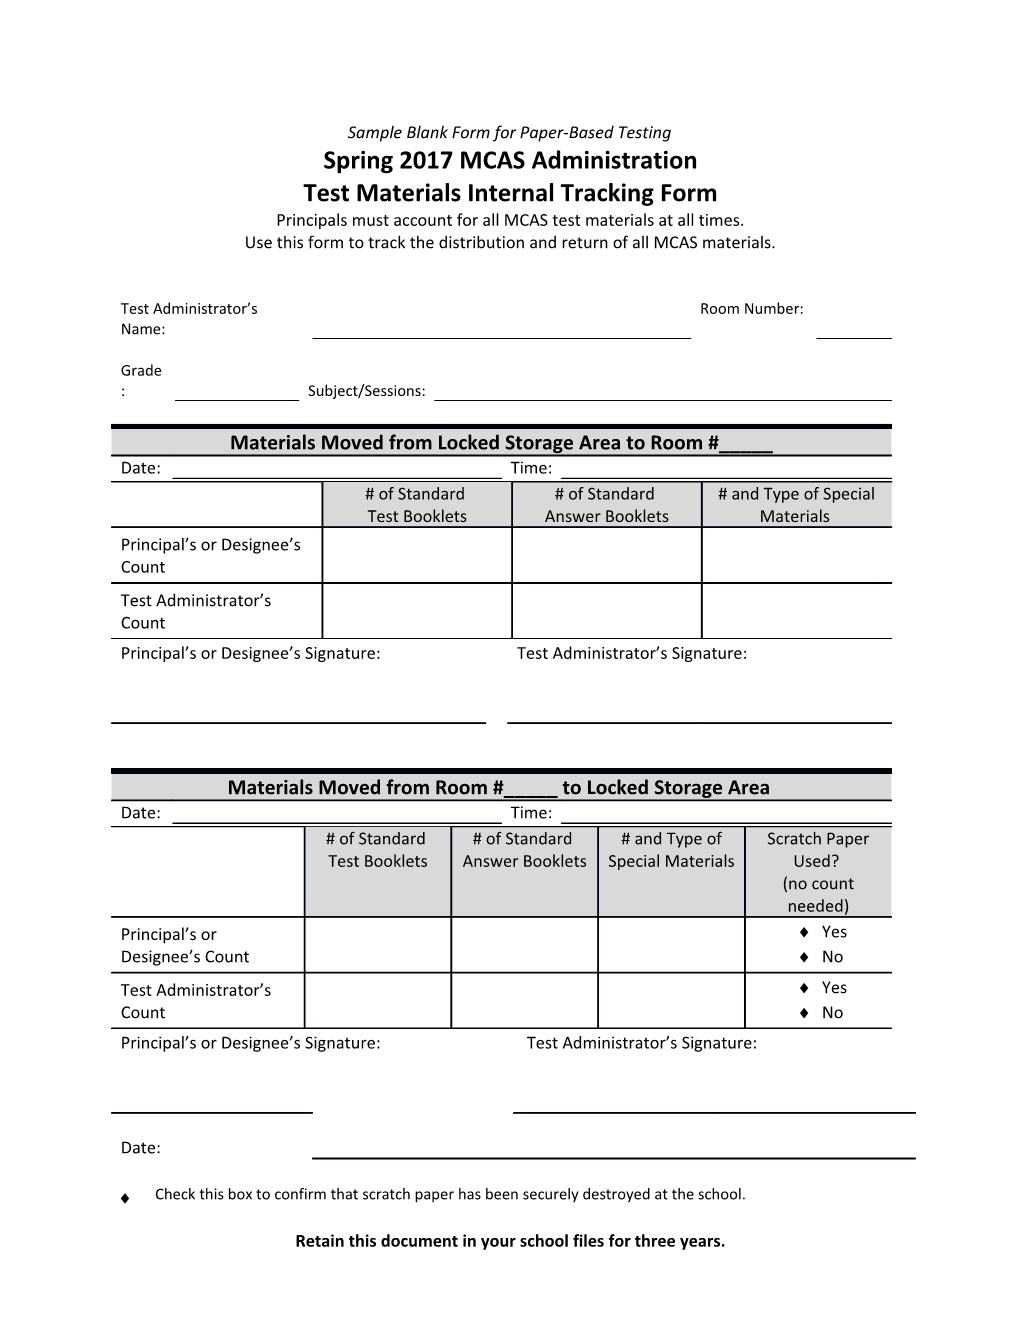 Test Materials Internal Tracking Form Spring 2017